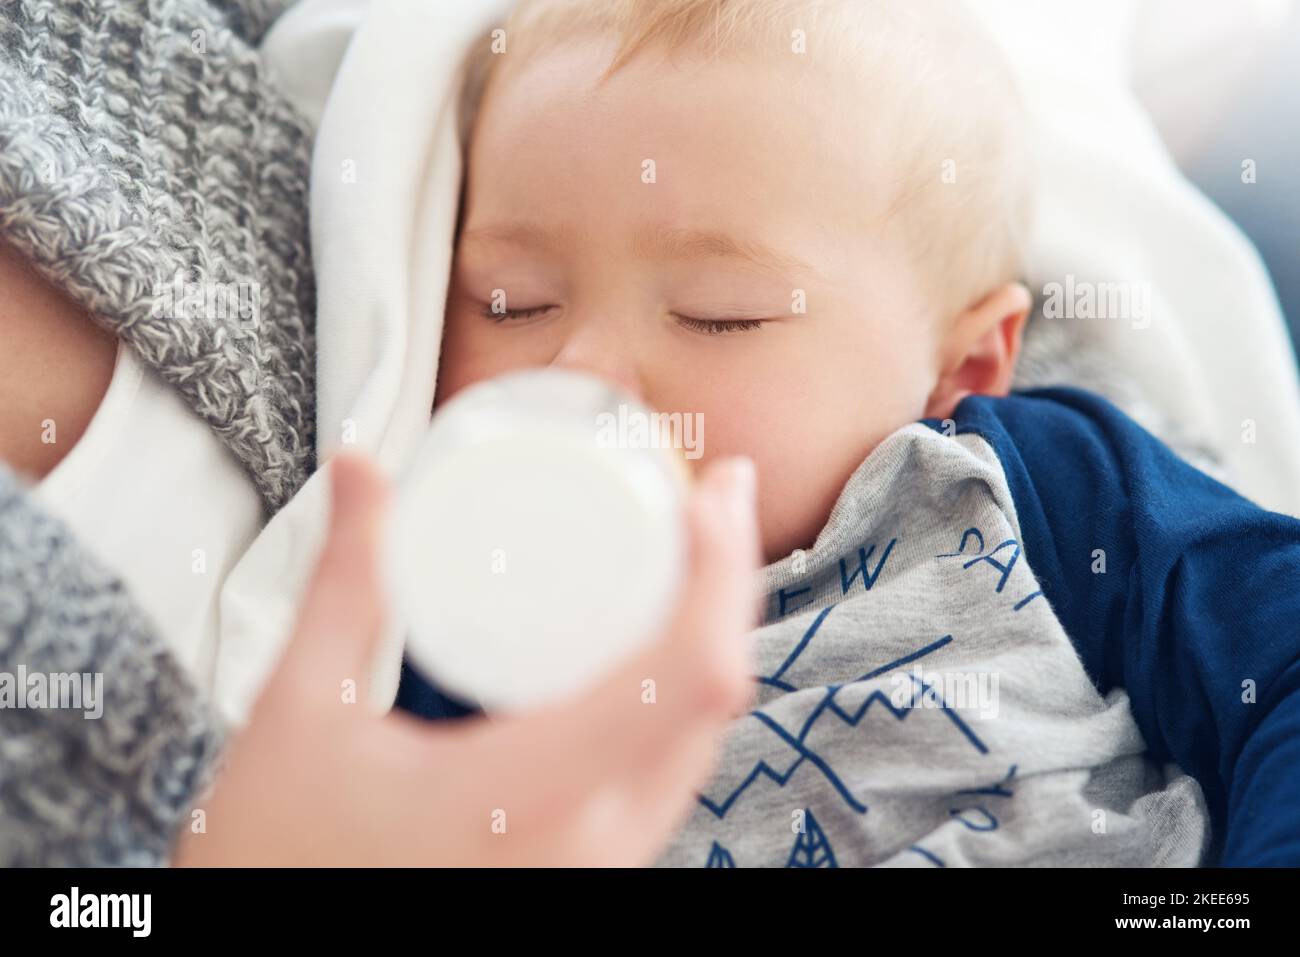 Nutrition and naps make for a healthy growing baby. a mother feeding her baby boy at home. Stock Photo